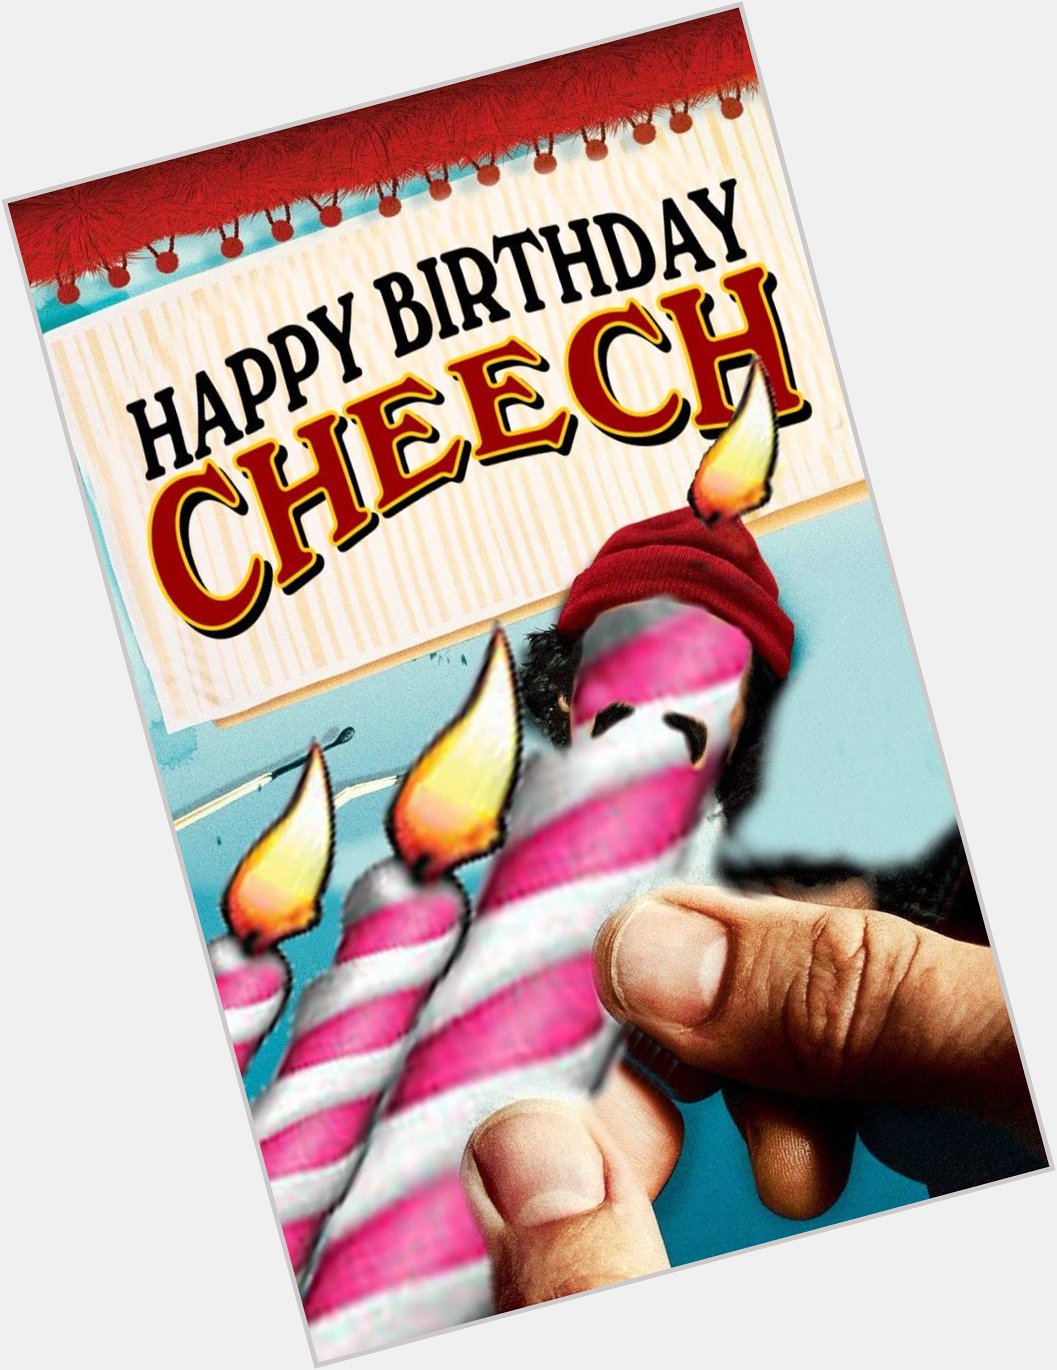 Happy Birthday to Cheech Marin from the comedy duo Cheech and Chong!     